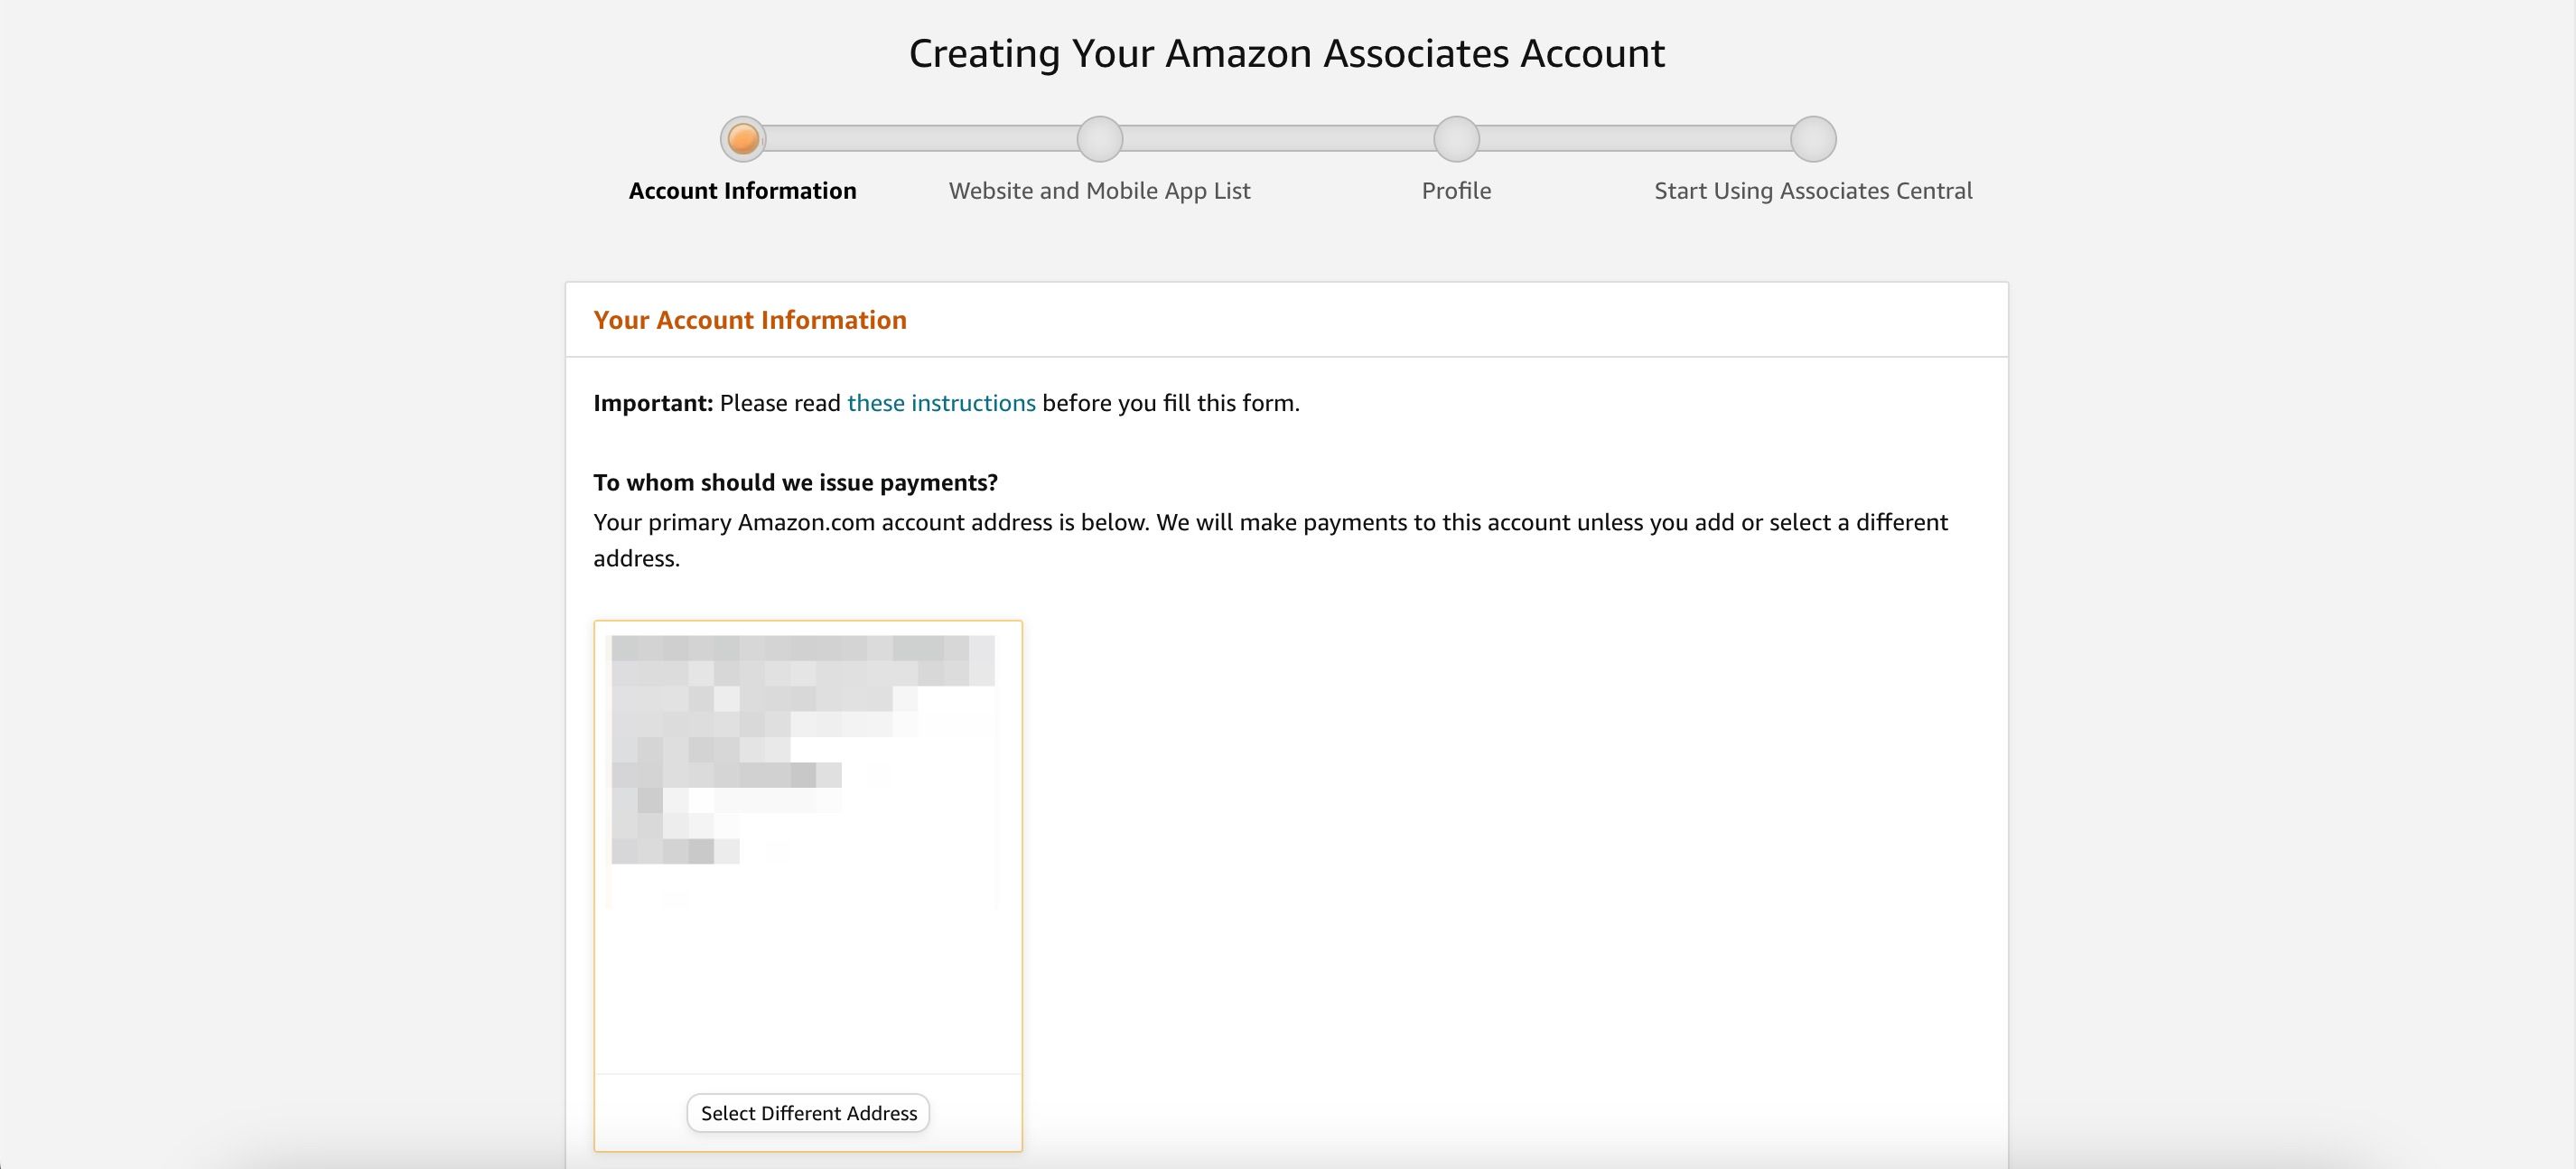 Enter your personal details when signing up for an Amazon Associates account